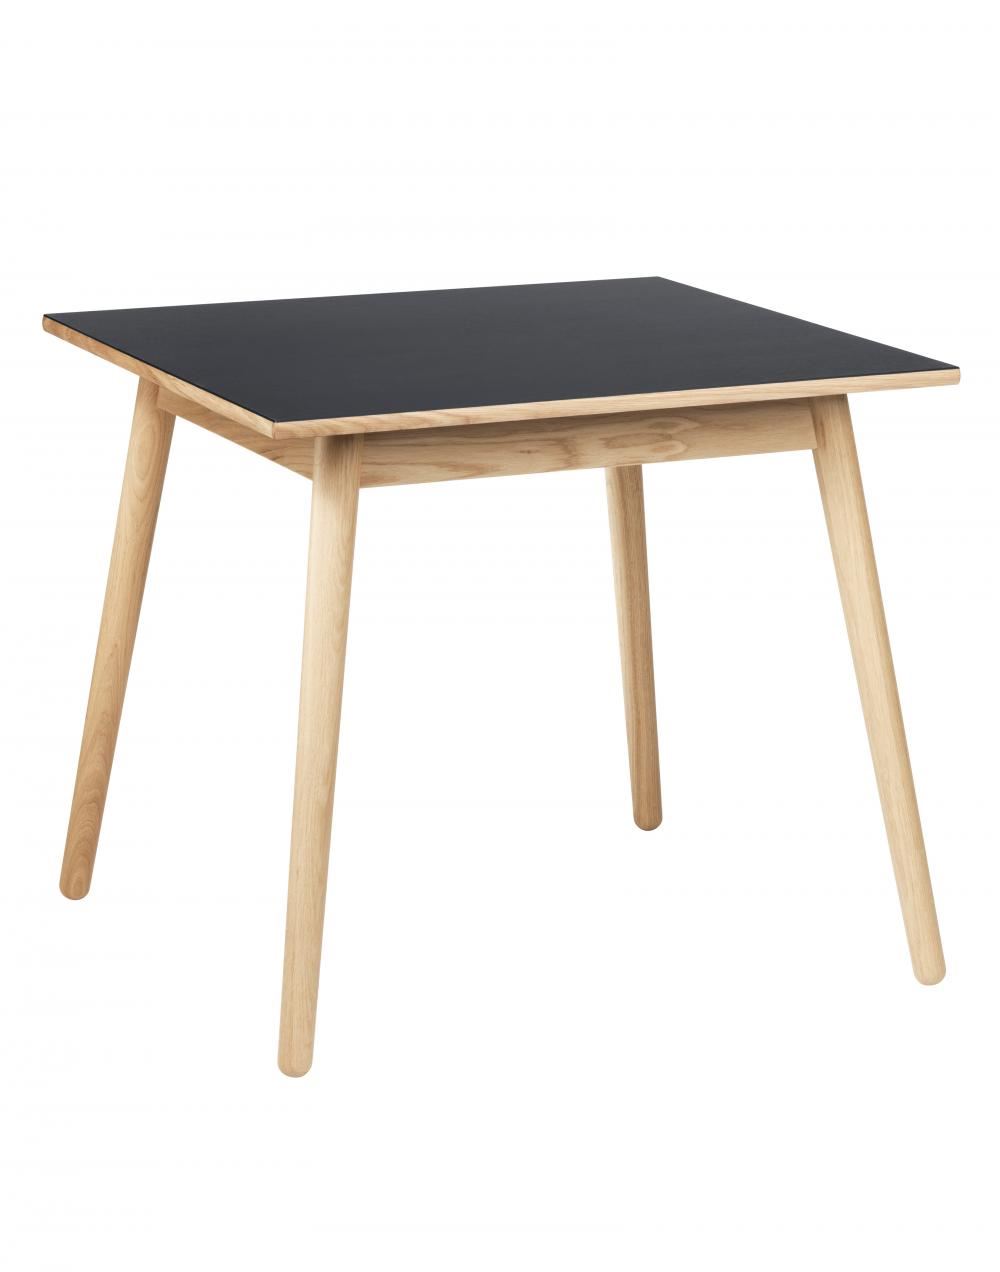 C35 Dining Table Small Medium Small Oak With Black Lino Top Oak With Black Lino Top